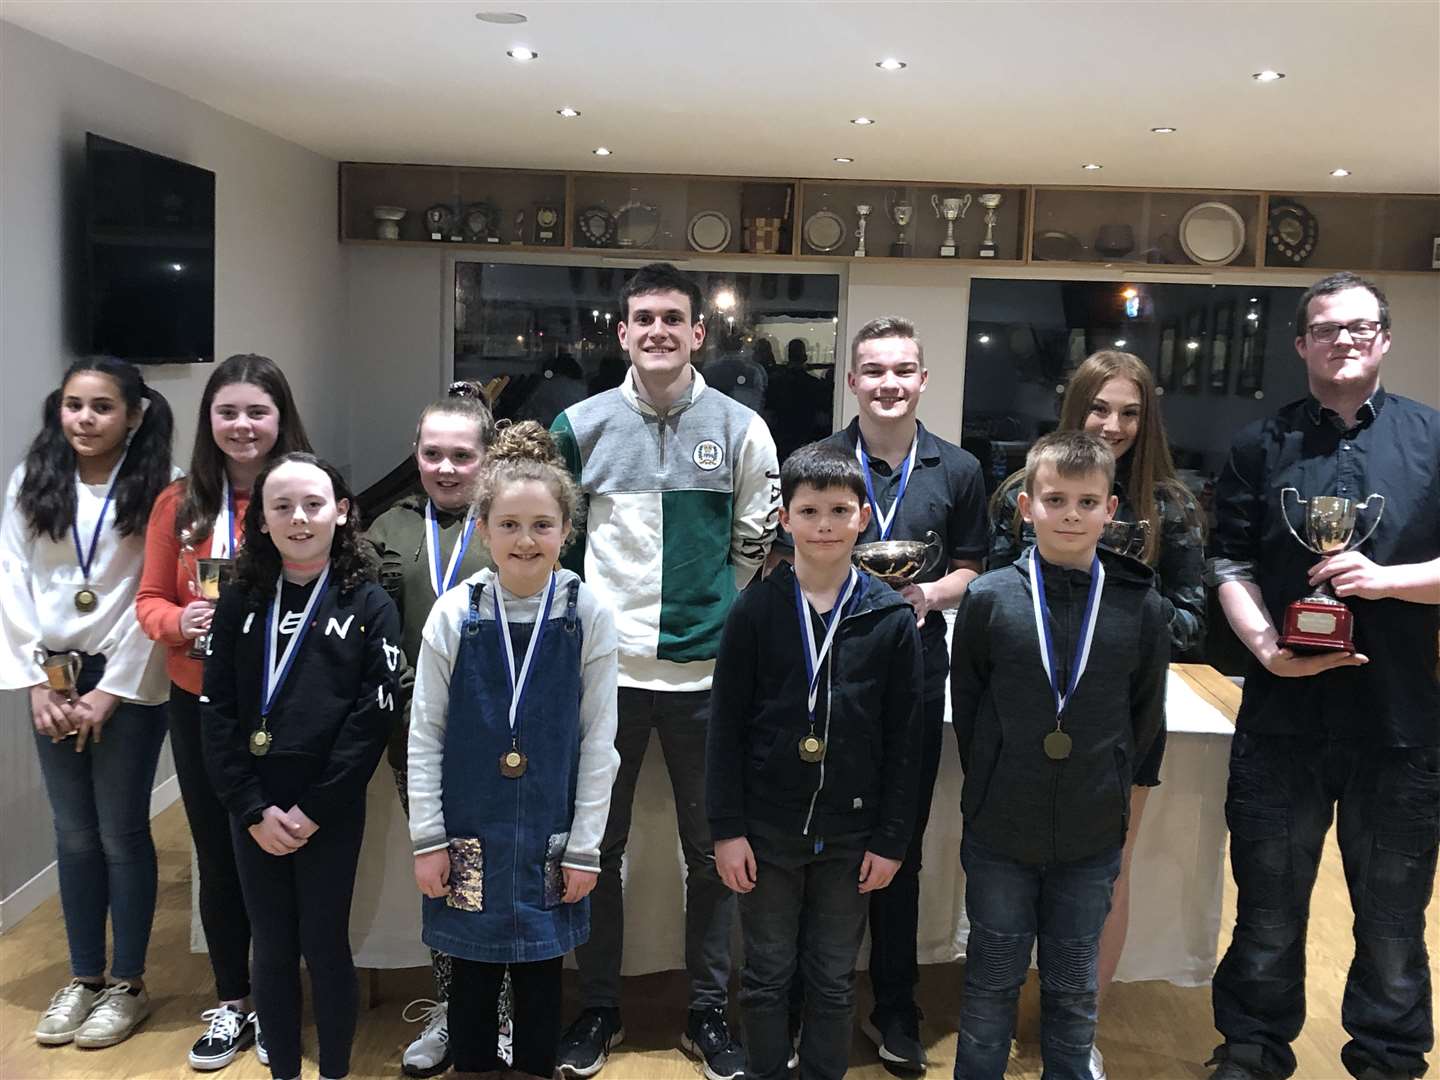 Trophy winners at CAAC's annual prize-giving, with junior coaches Kieran Johns, Erin MacIntosh and Ryan McCarthy looking on.